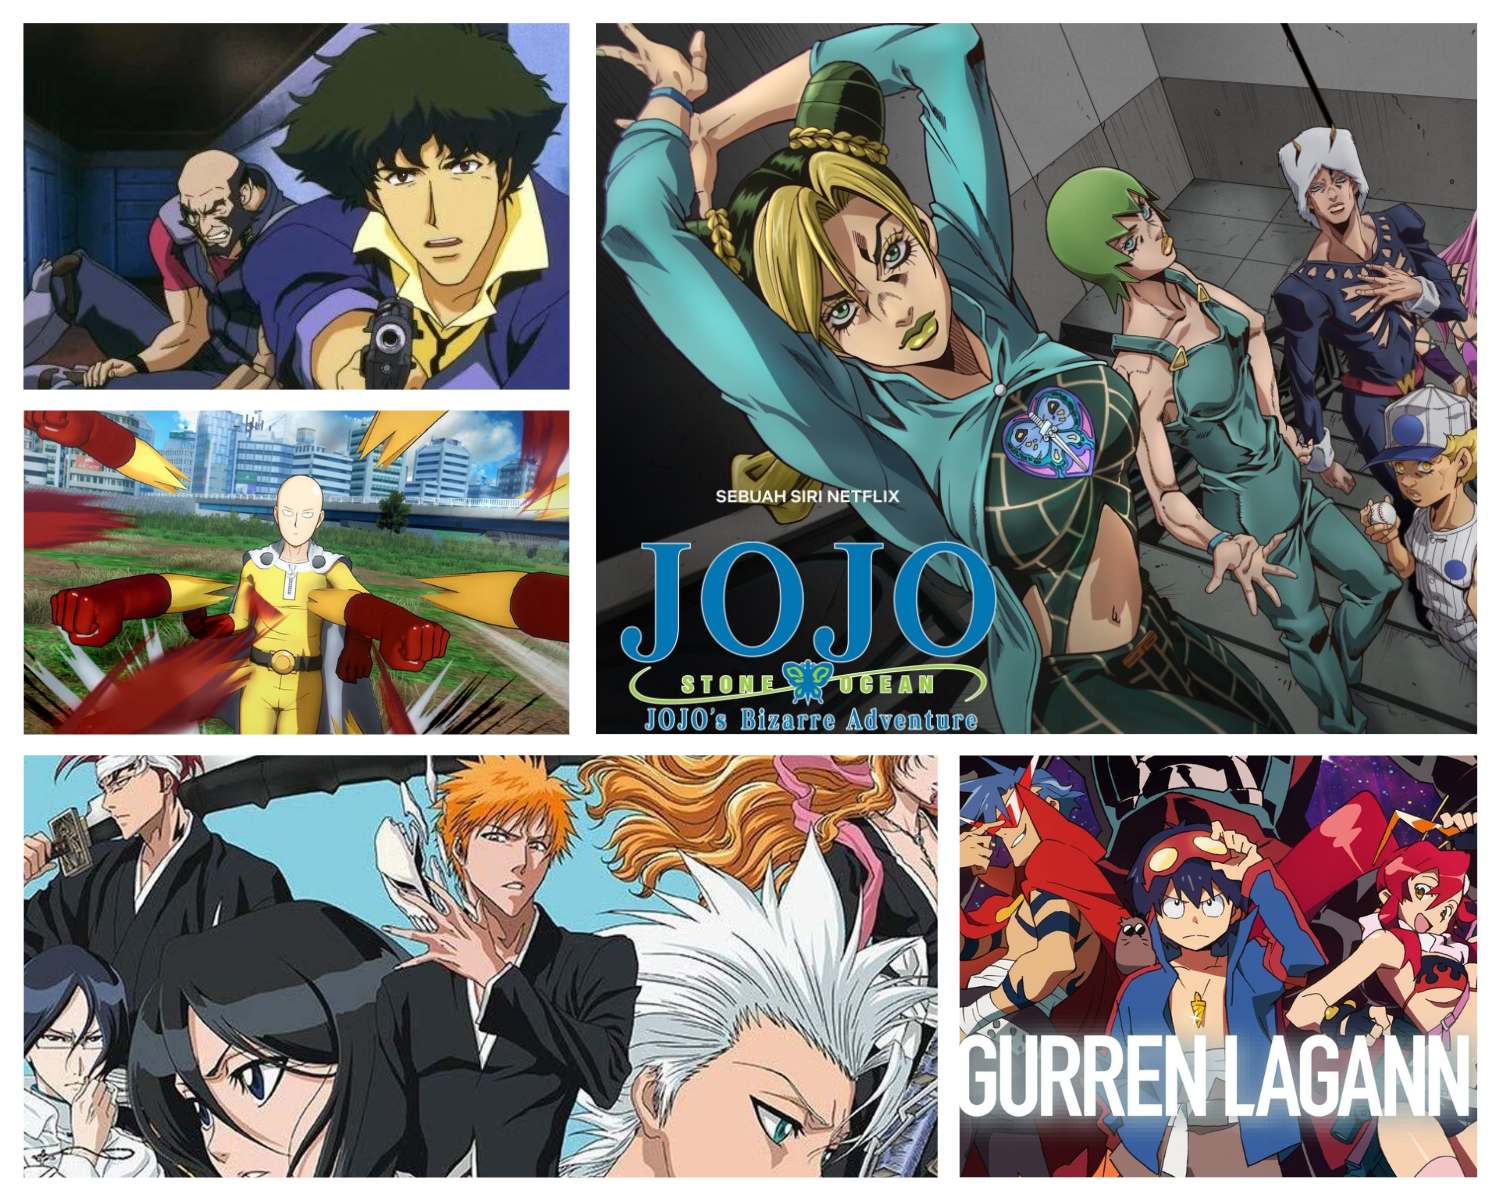 Adventure Anime Shows and Movies  Crunchyroll